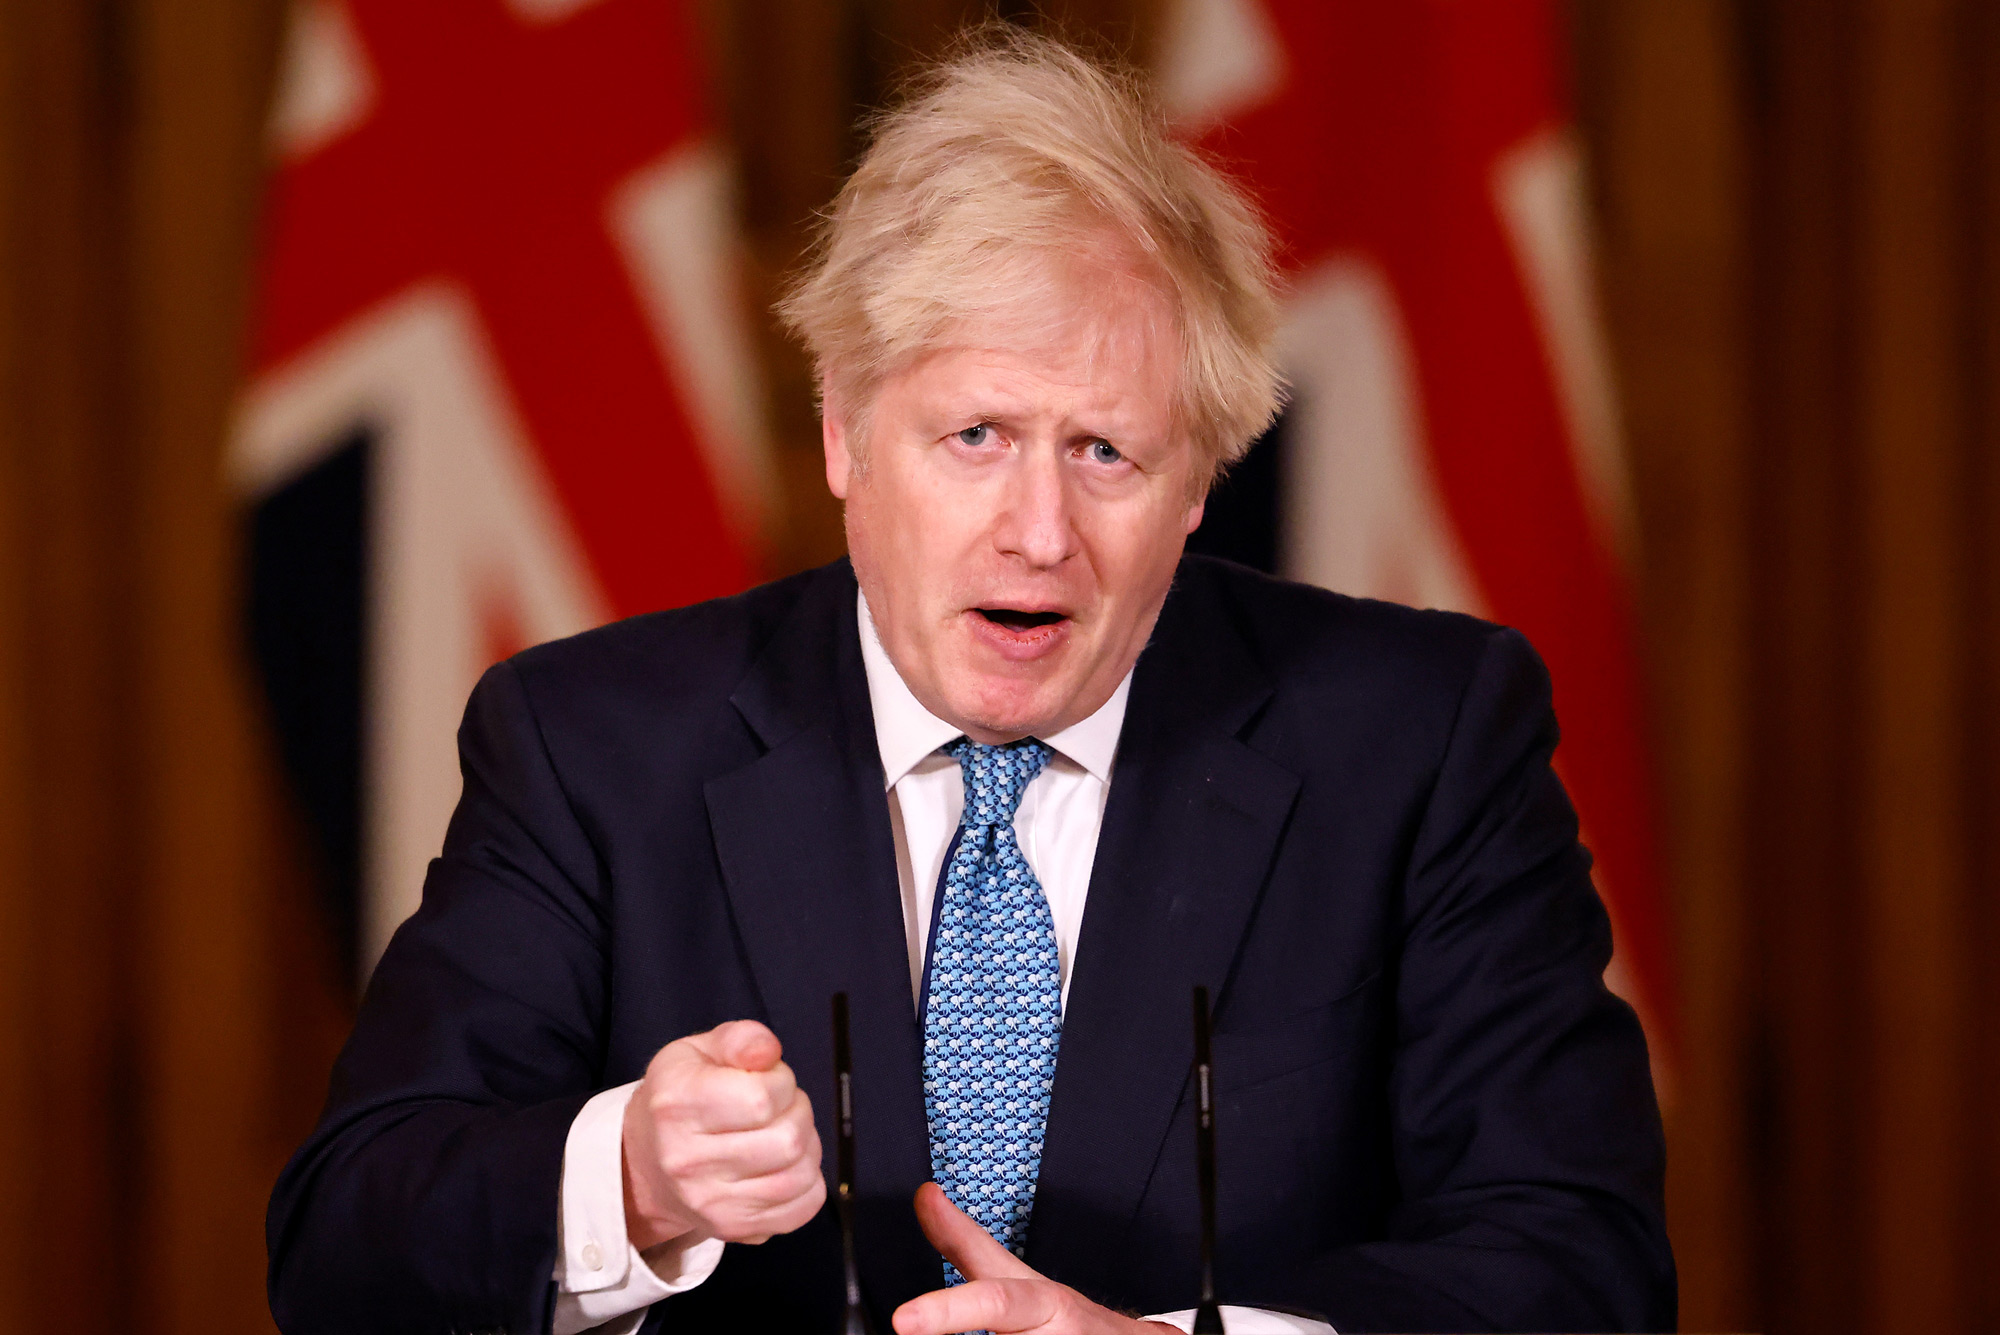 Britain's Prime Minister Boris Johnson speaks during a virtual press conference inside 10 Downing Street in central London on December 21.